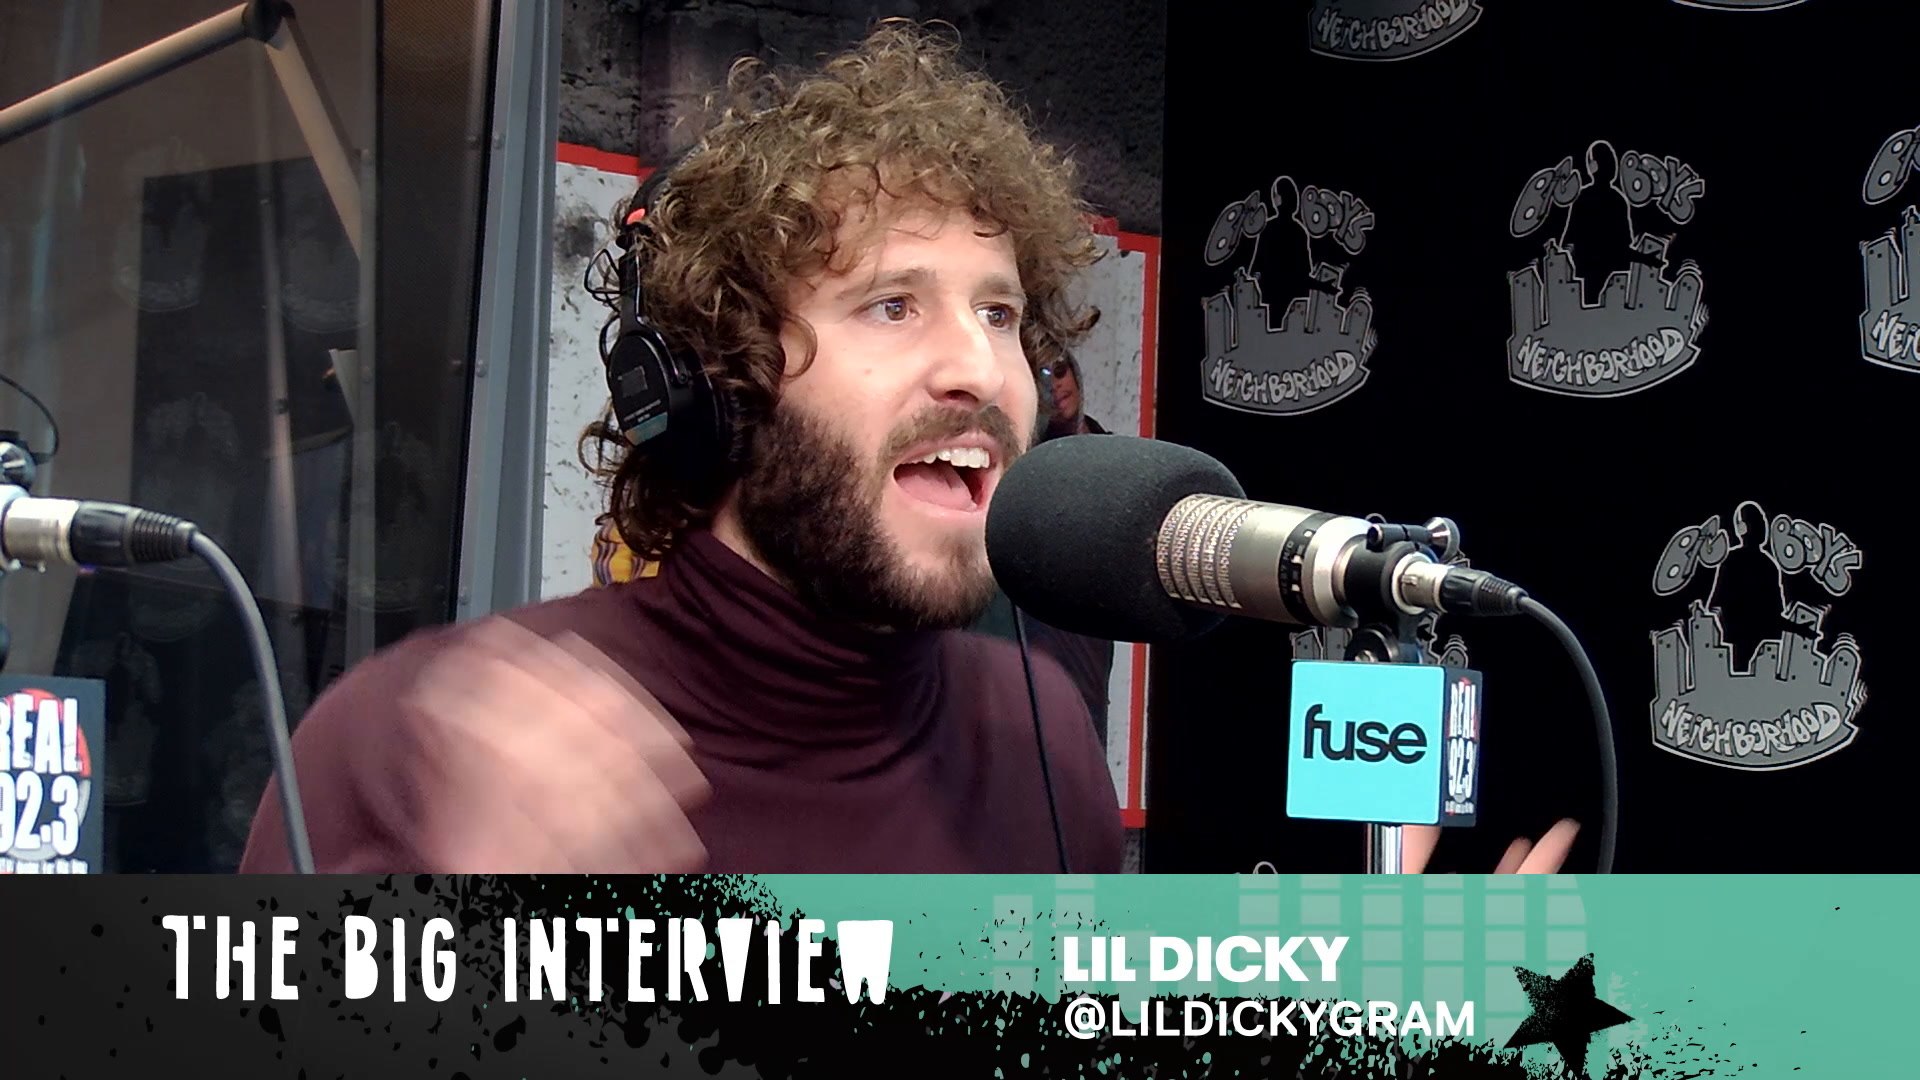 Lil Dicky On His Past Career Goals That Didn't Include Rapping - video  Dailymotion